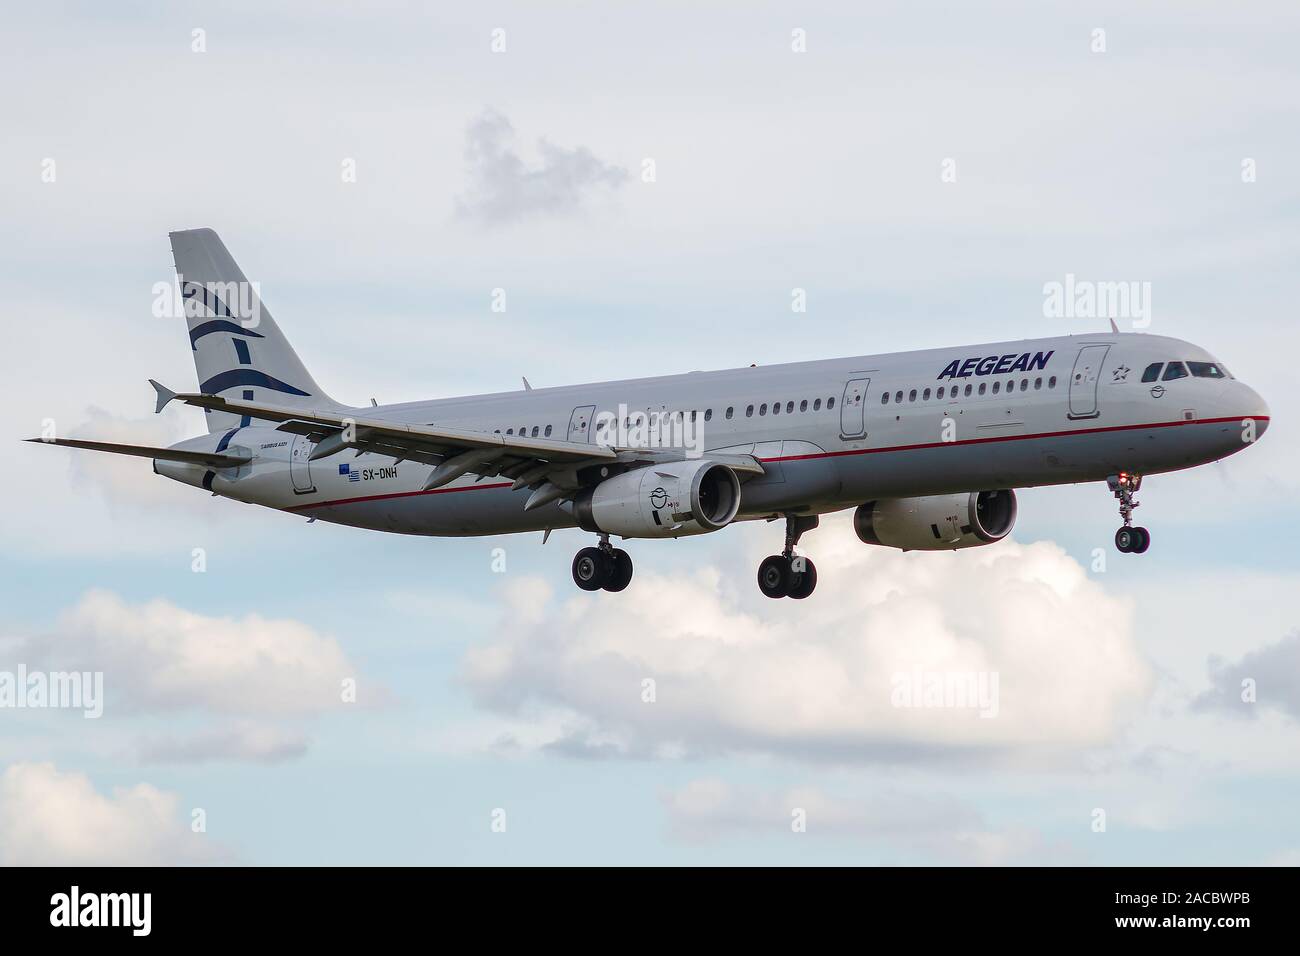 SX-DNH, 23 September 2019, Airbus A321-231-3546 landing at Paris Charles de Gaulle at the end of Aegean Airlines flight A3612 coming from Athens Stock Photo